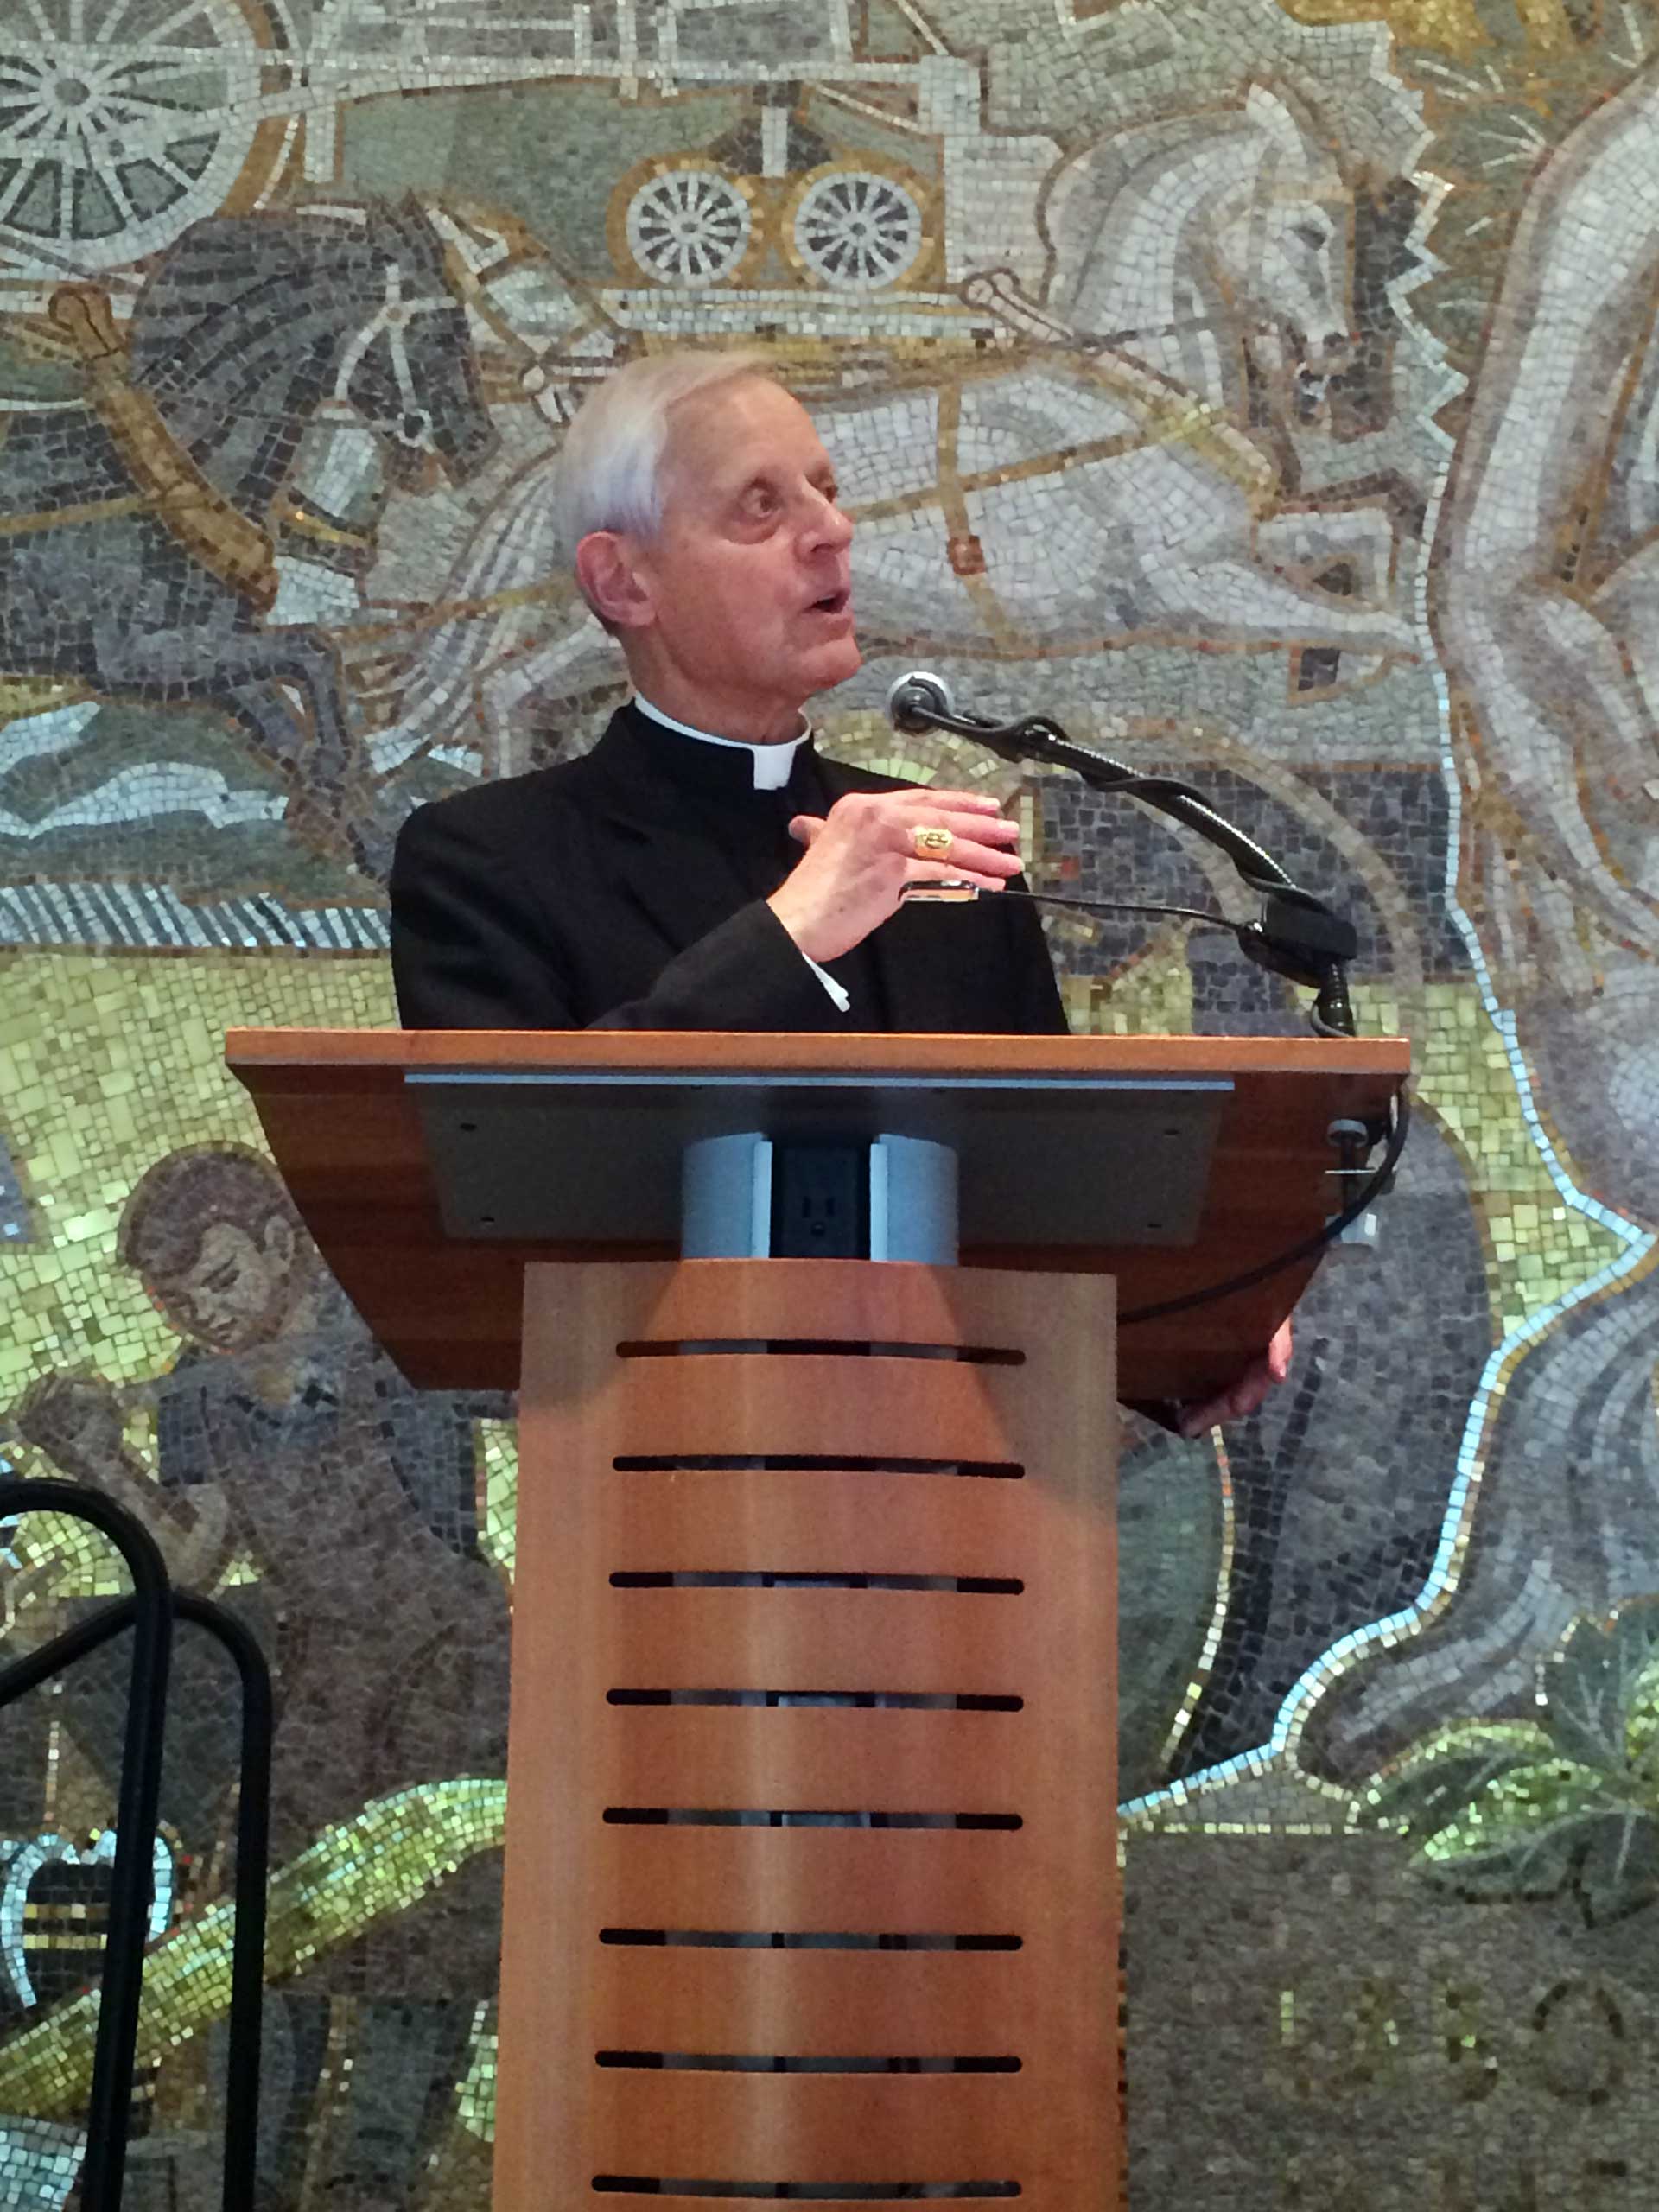 Cardinal Donald Wuerl speaks at an AFL-CIO event in Washington on June 15, 2015. (Elizabeth Dias—TIME)